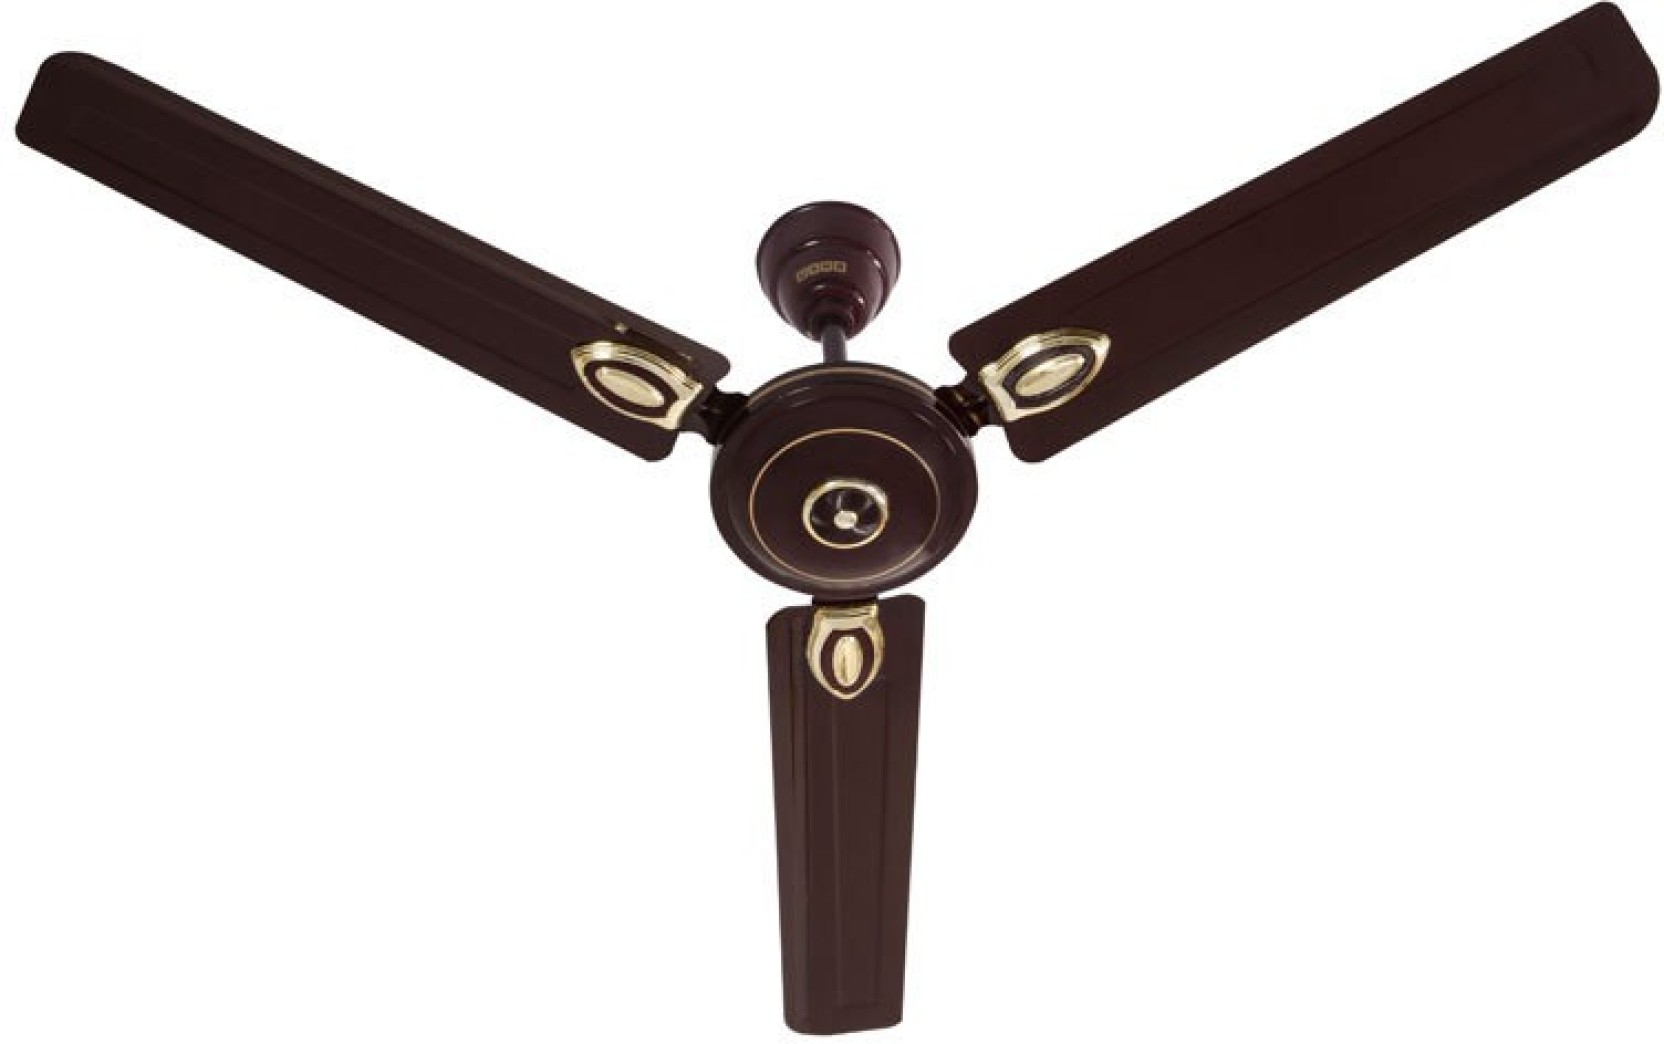 Usha Aerostyle Deluxe 1200mm 3 Blade Ceiling Fan Price In India